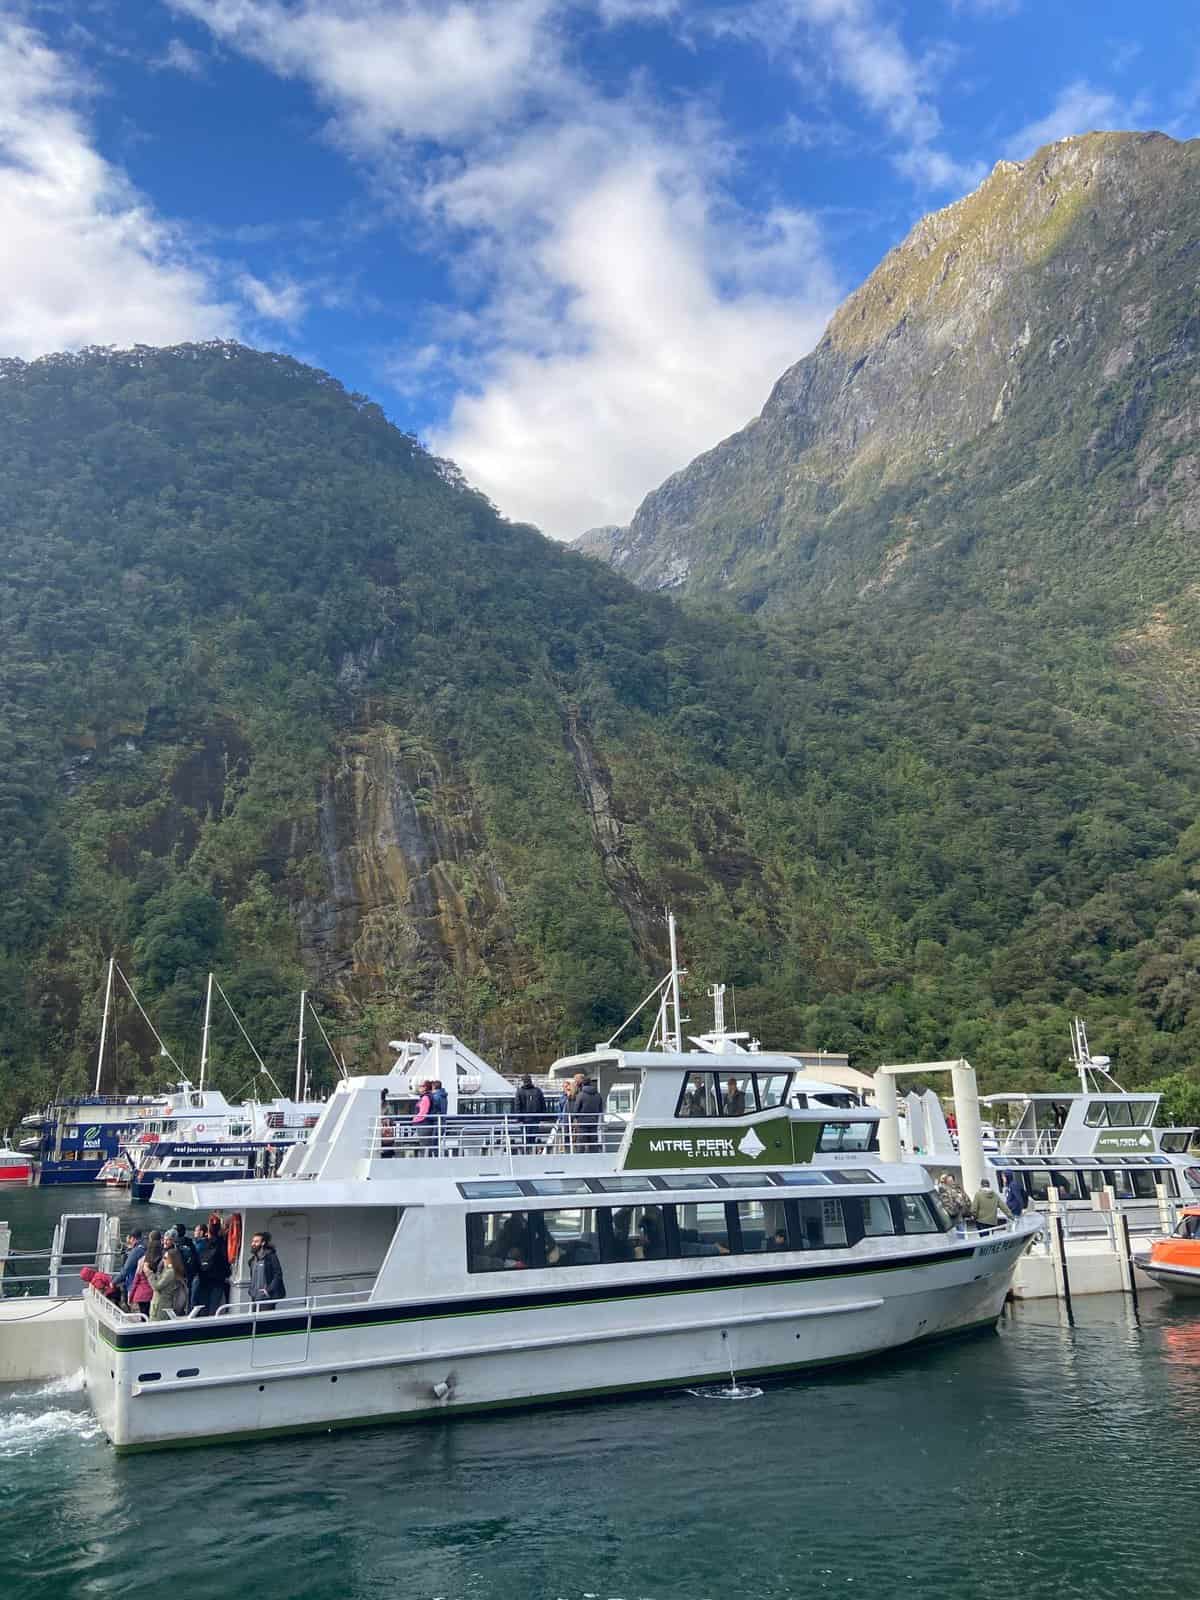 Mitre Peak Cruises boat pulling into the harbour at Milford Sound, New Zealand